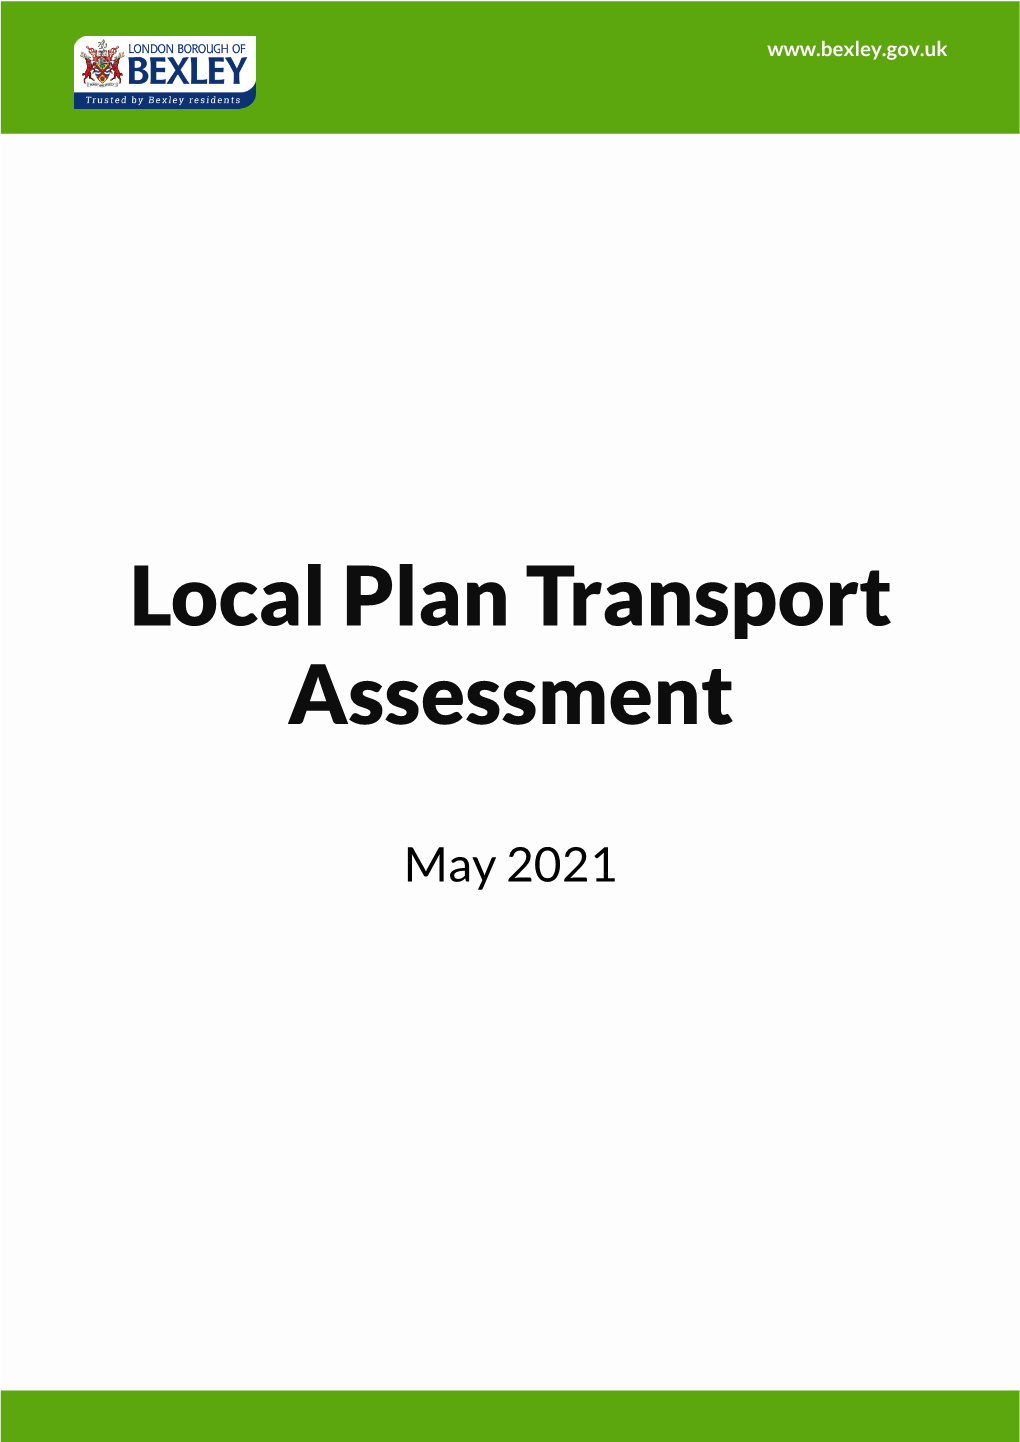 Local Plan Transport Assessment (May 2021)